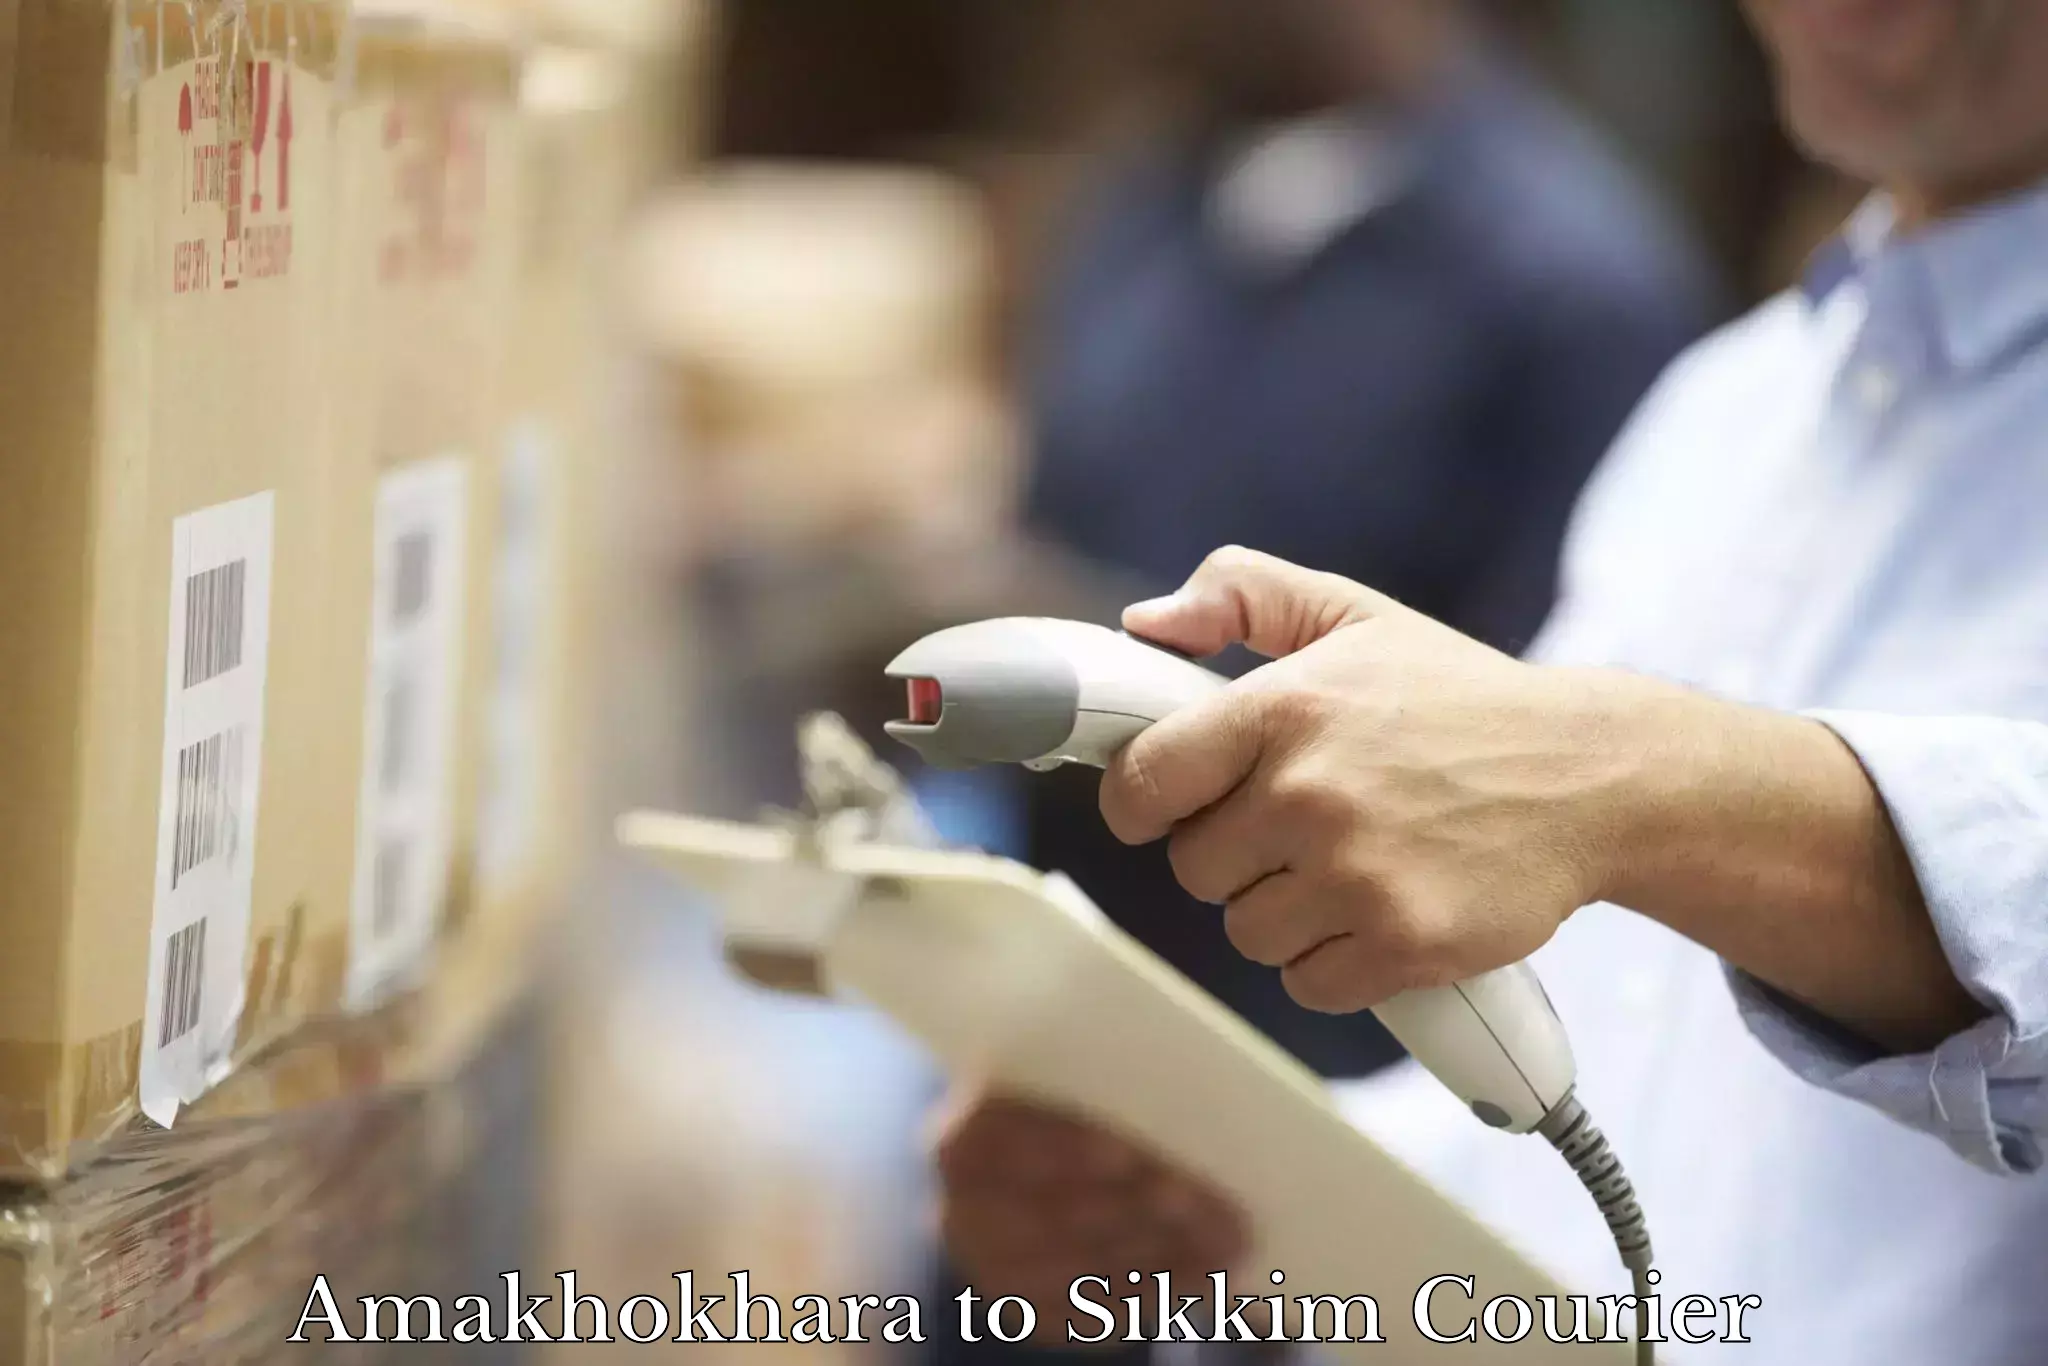 Subscription-based courier Amakhokhara to North Sikkim